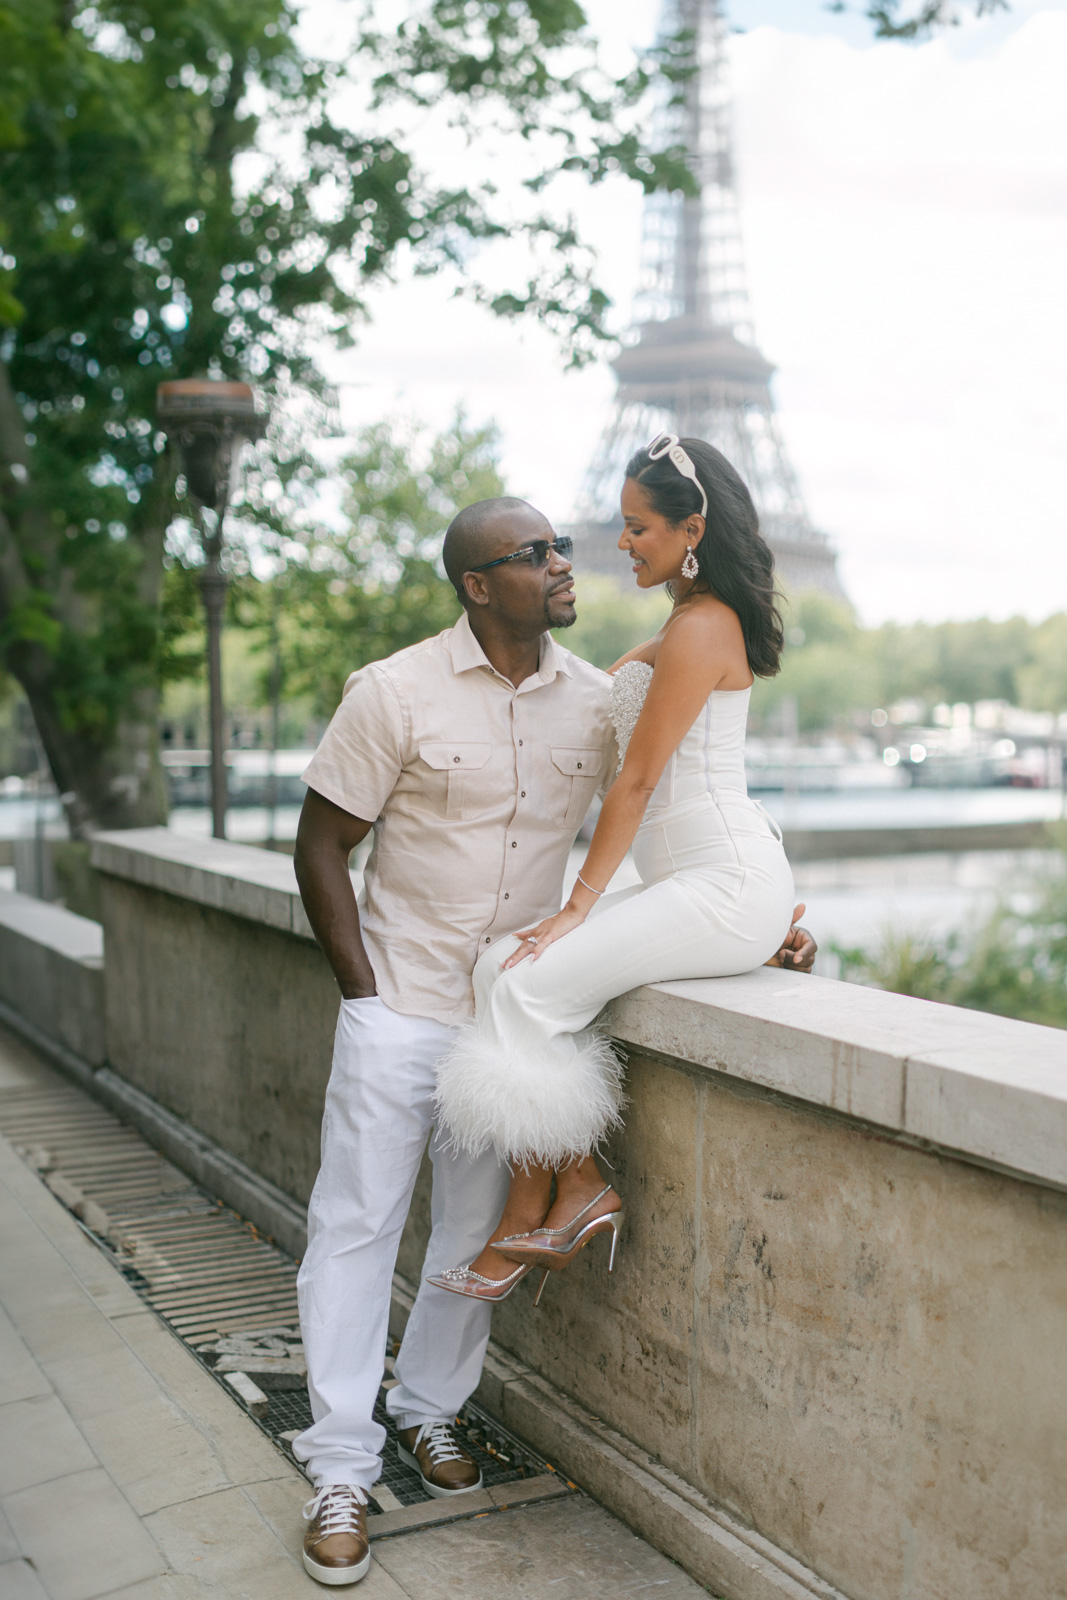 Captured in the glow of the setting sun, a couple shares a tender moment during their engagement session Trocadéro, with the Eiffel Tower lending its grandeur to their love story.